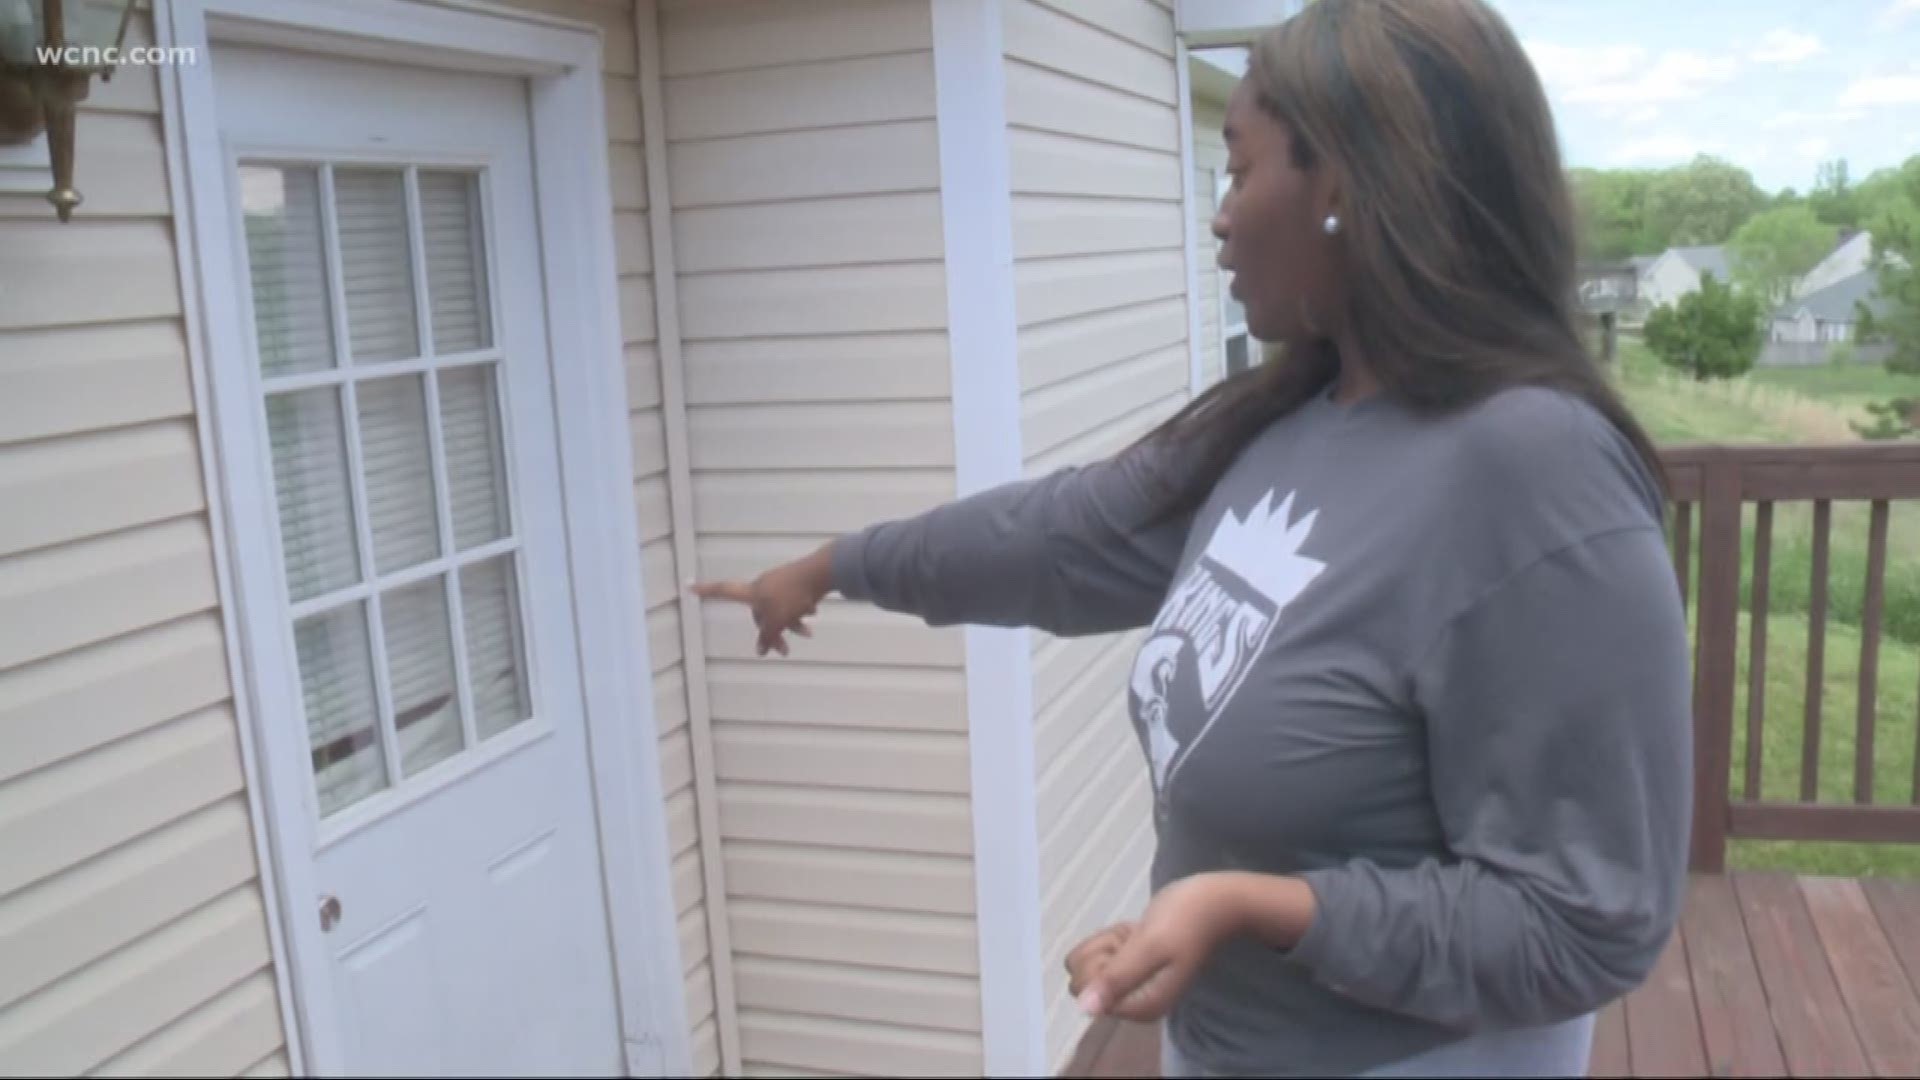 19-year-old Carlesha Roberts said she was home alone when she heard the suspects talking outside; the next thing she knew, they were at the door.